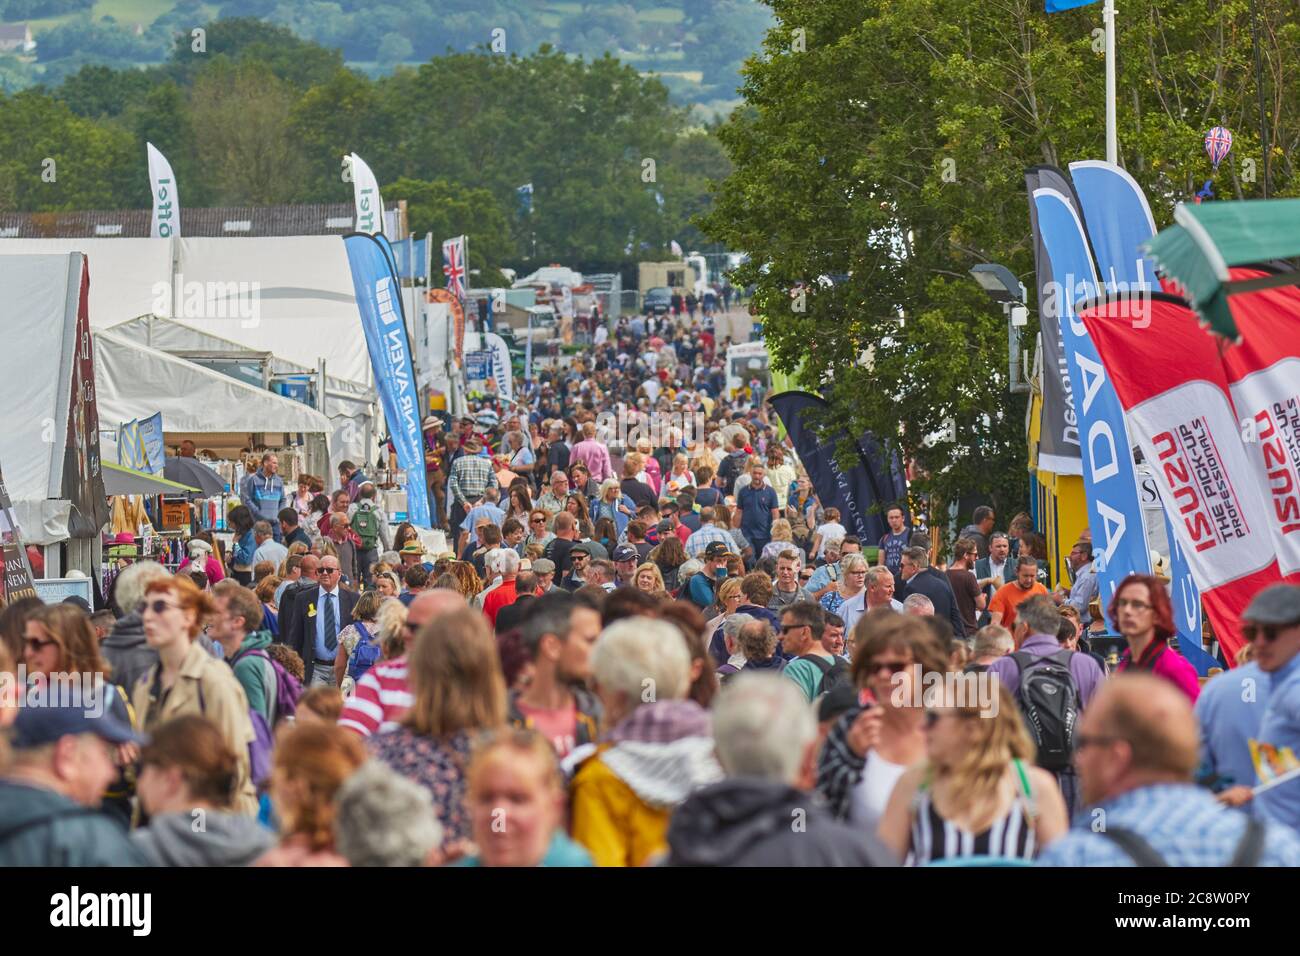 Crowds throng a summer show; at the Royal Bath and West Show, an annual agricuiltural show near Shepton Mallet, Somerset, Great Britain. Stock Photo